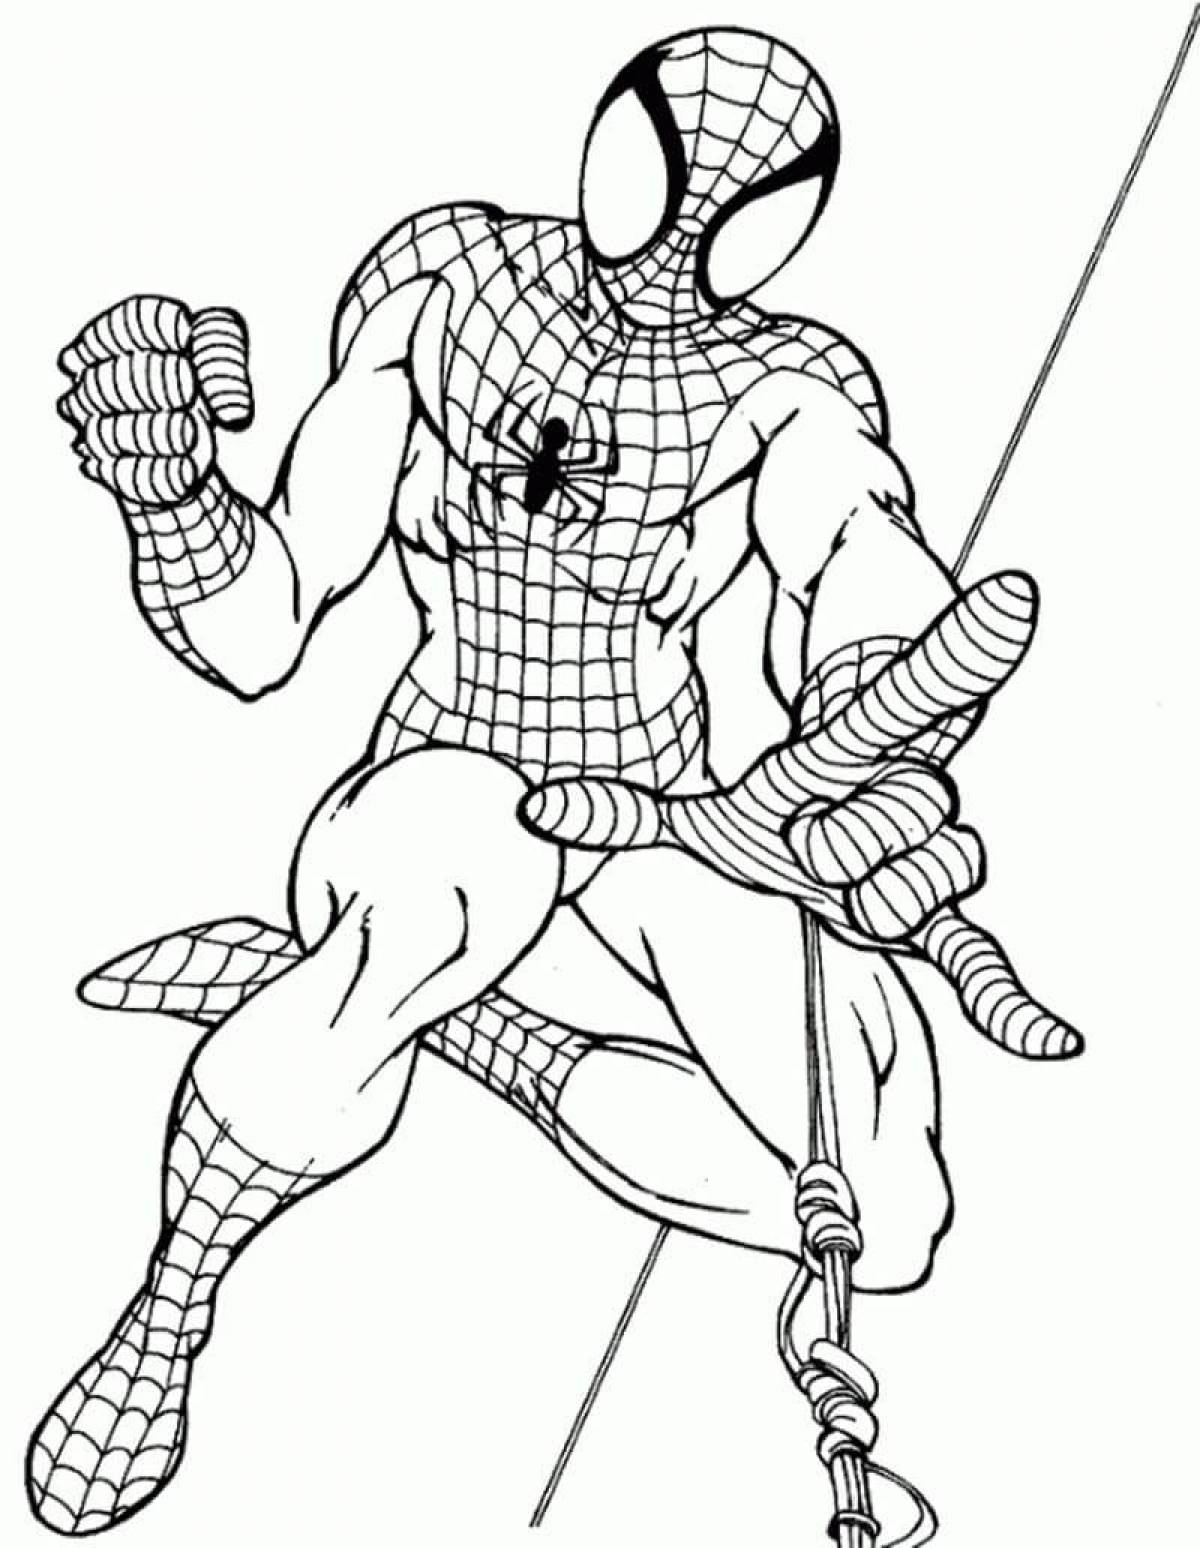 Spiderman dynamic coloring for boys